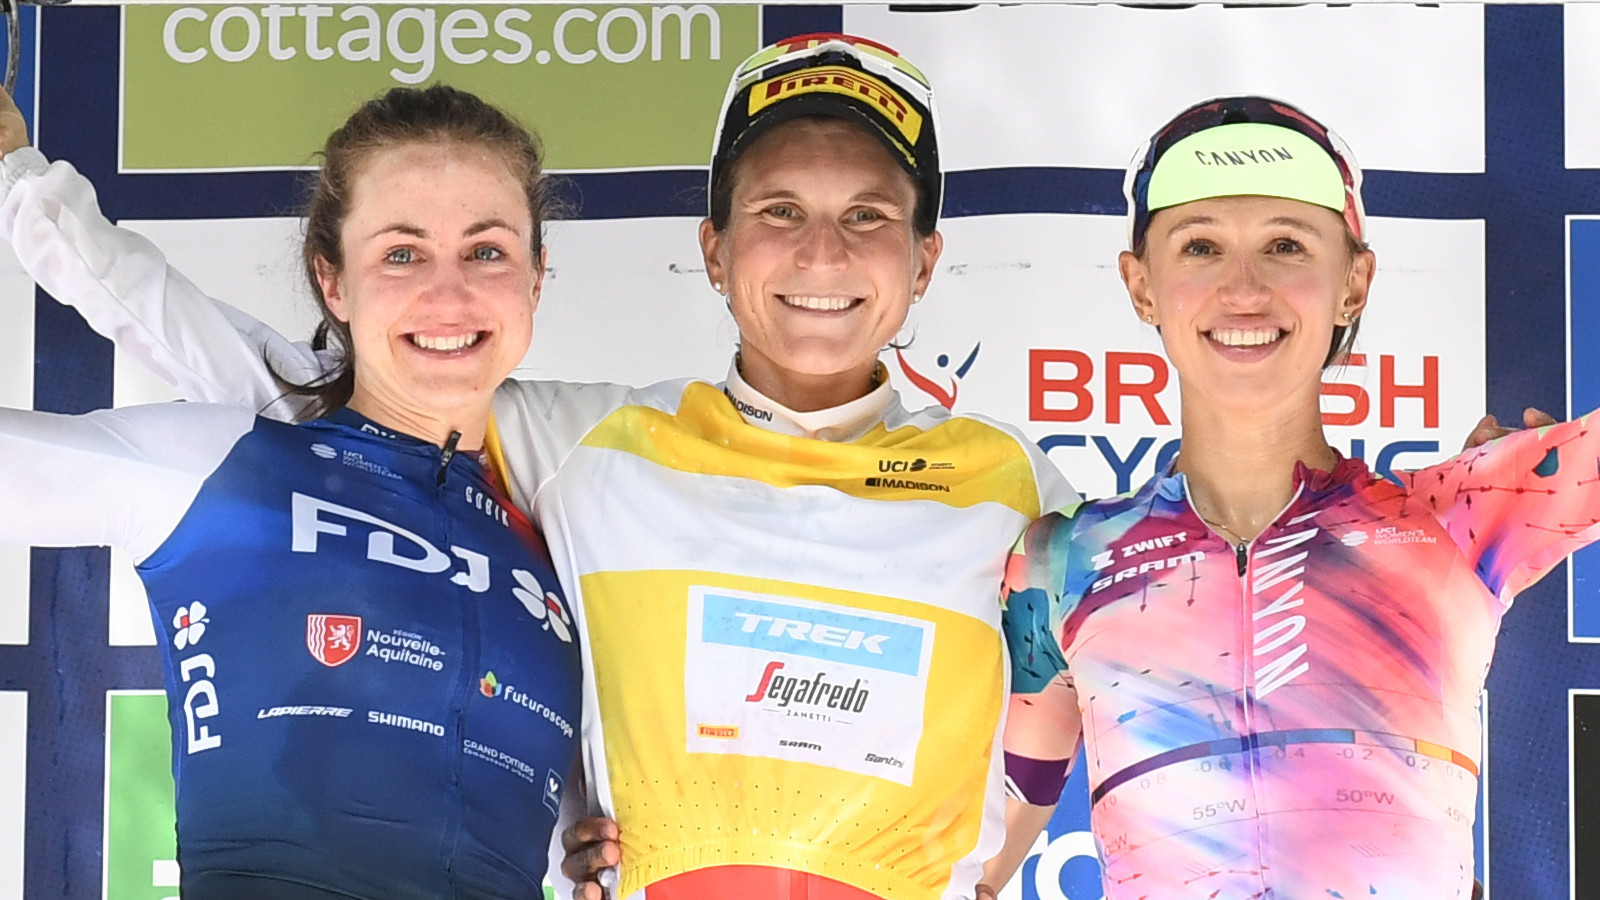 Borghini finishes third on final stage to clinch 2022 Women's Tour